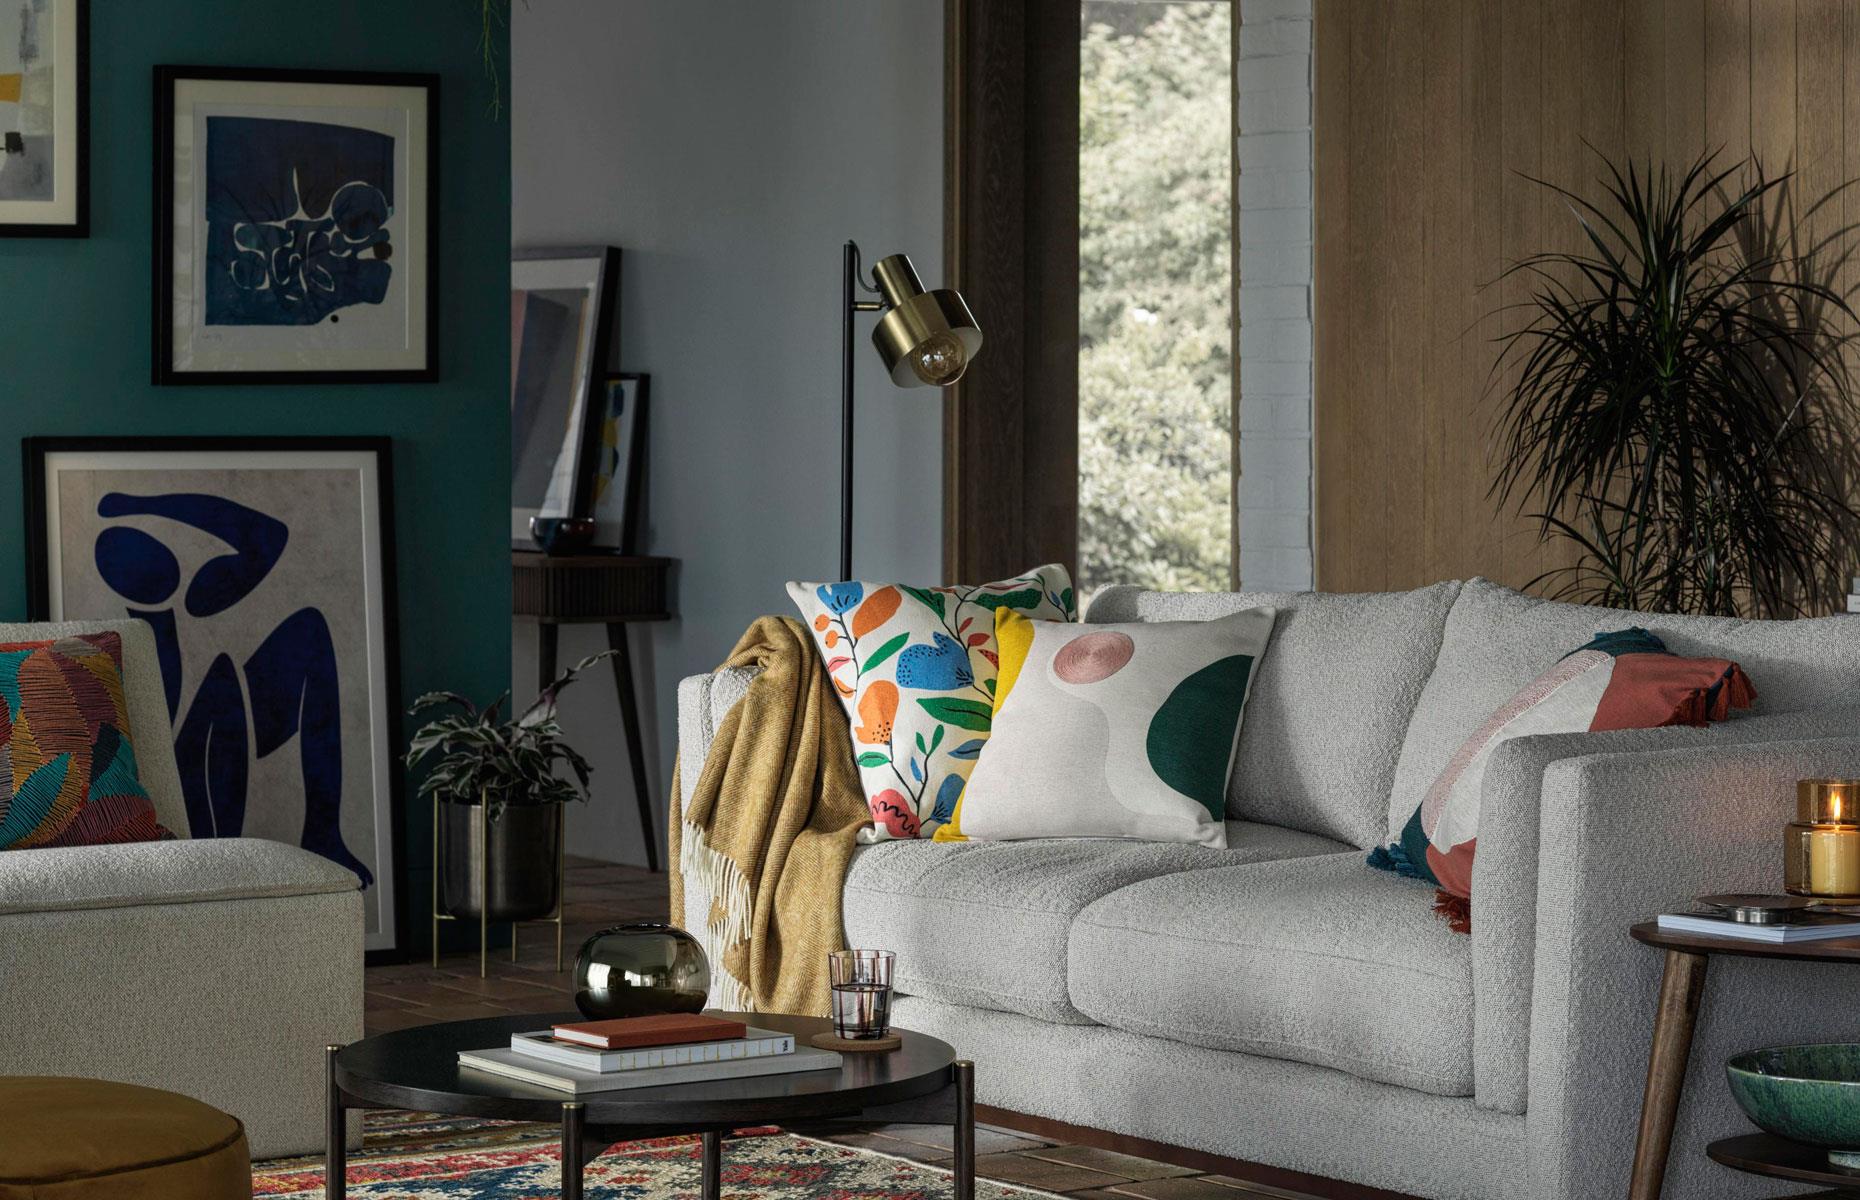 <p>Large open-plan living rooms can lack character so adding personal objects will make the space feel homely. Rich teal creates an interesting base for this picture wall, creating a flexible focal point that anchors the scheme. Mid-century furniture and pops of mustard and terracotta add to the eclectic look of this inviting family space.  </p>